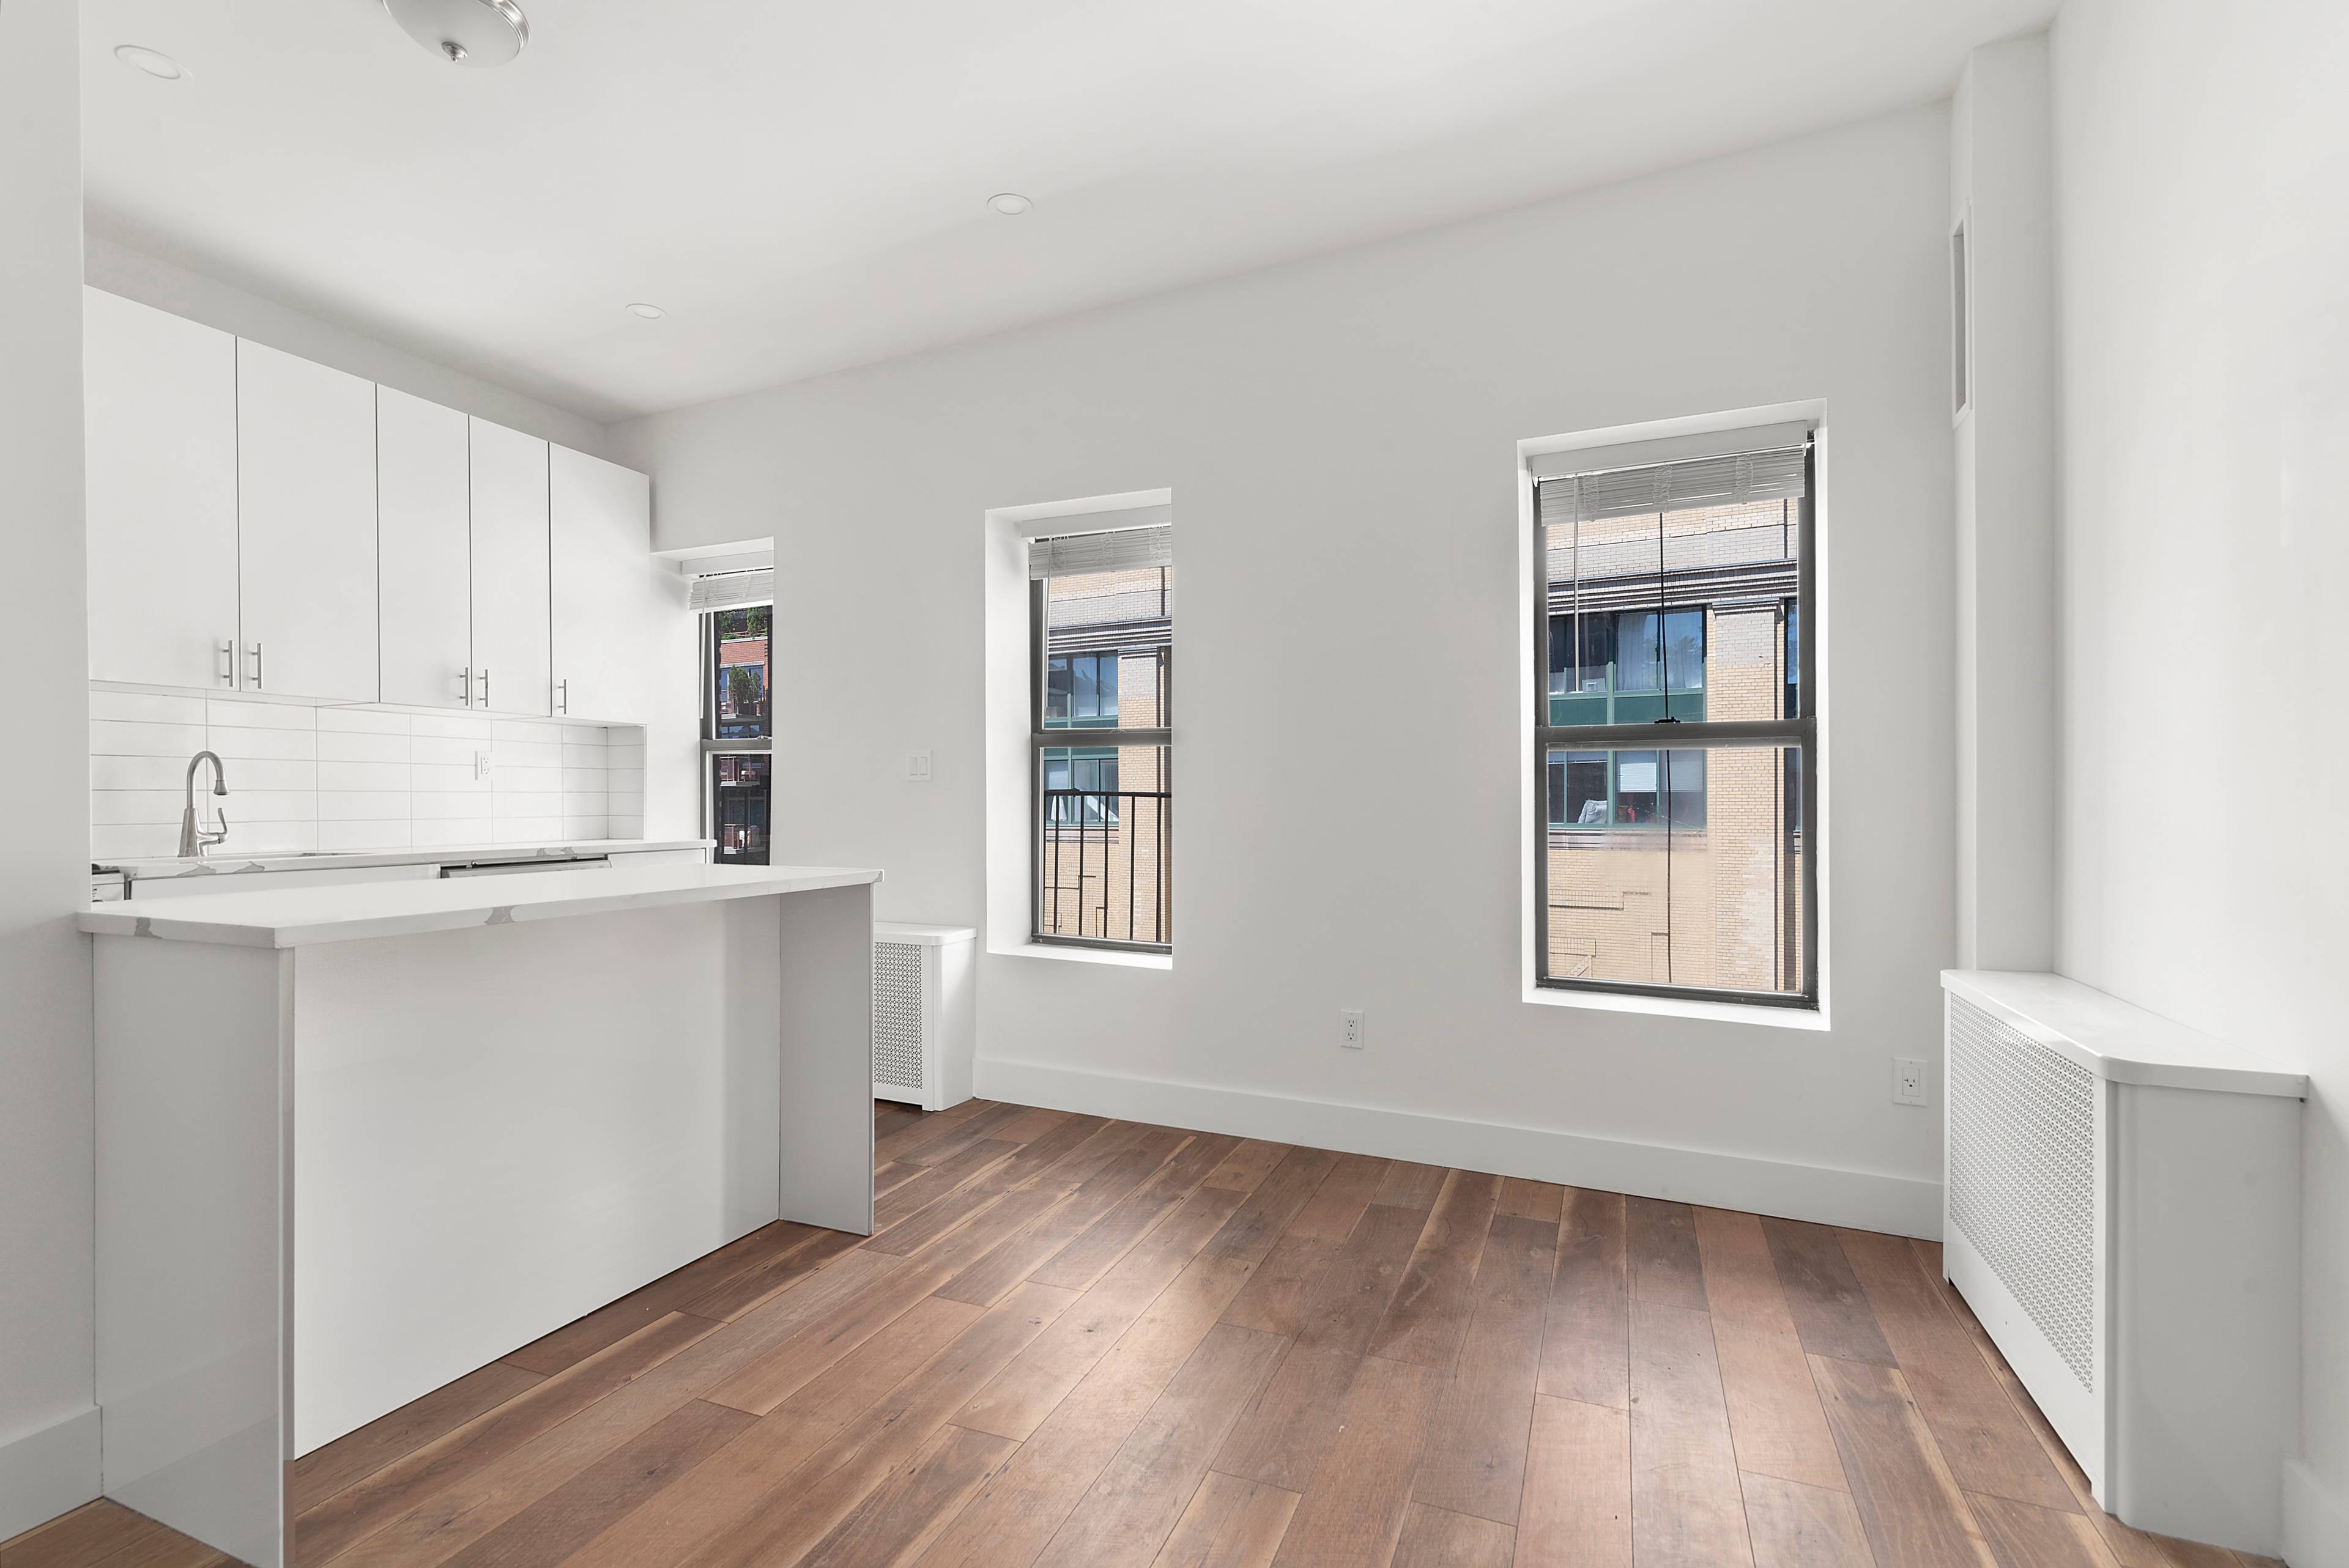 Charming and spacious renovated one bedroom in the heart of the West Village Meat Packing District, no detail was overlooked by the landlord.